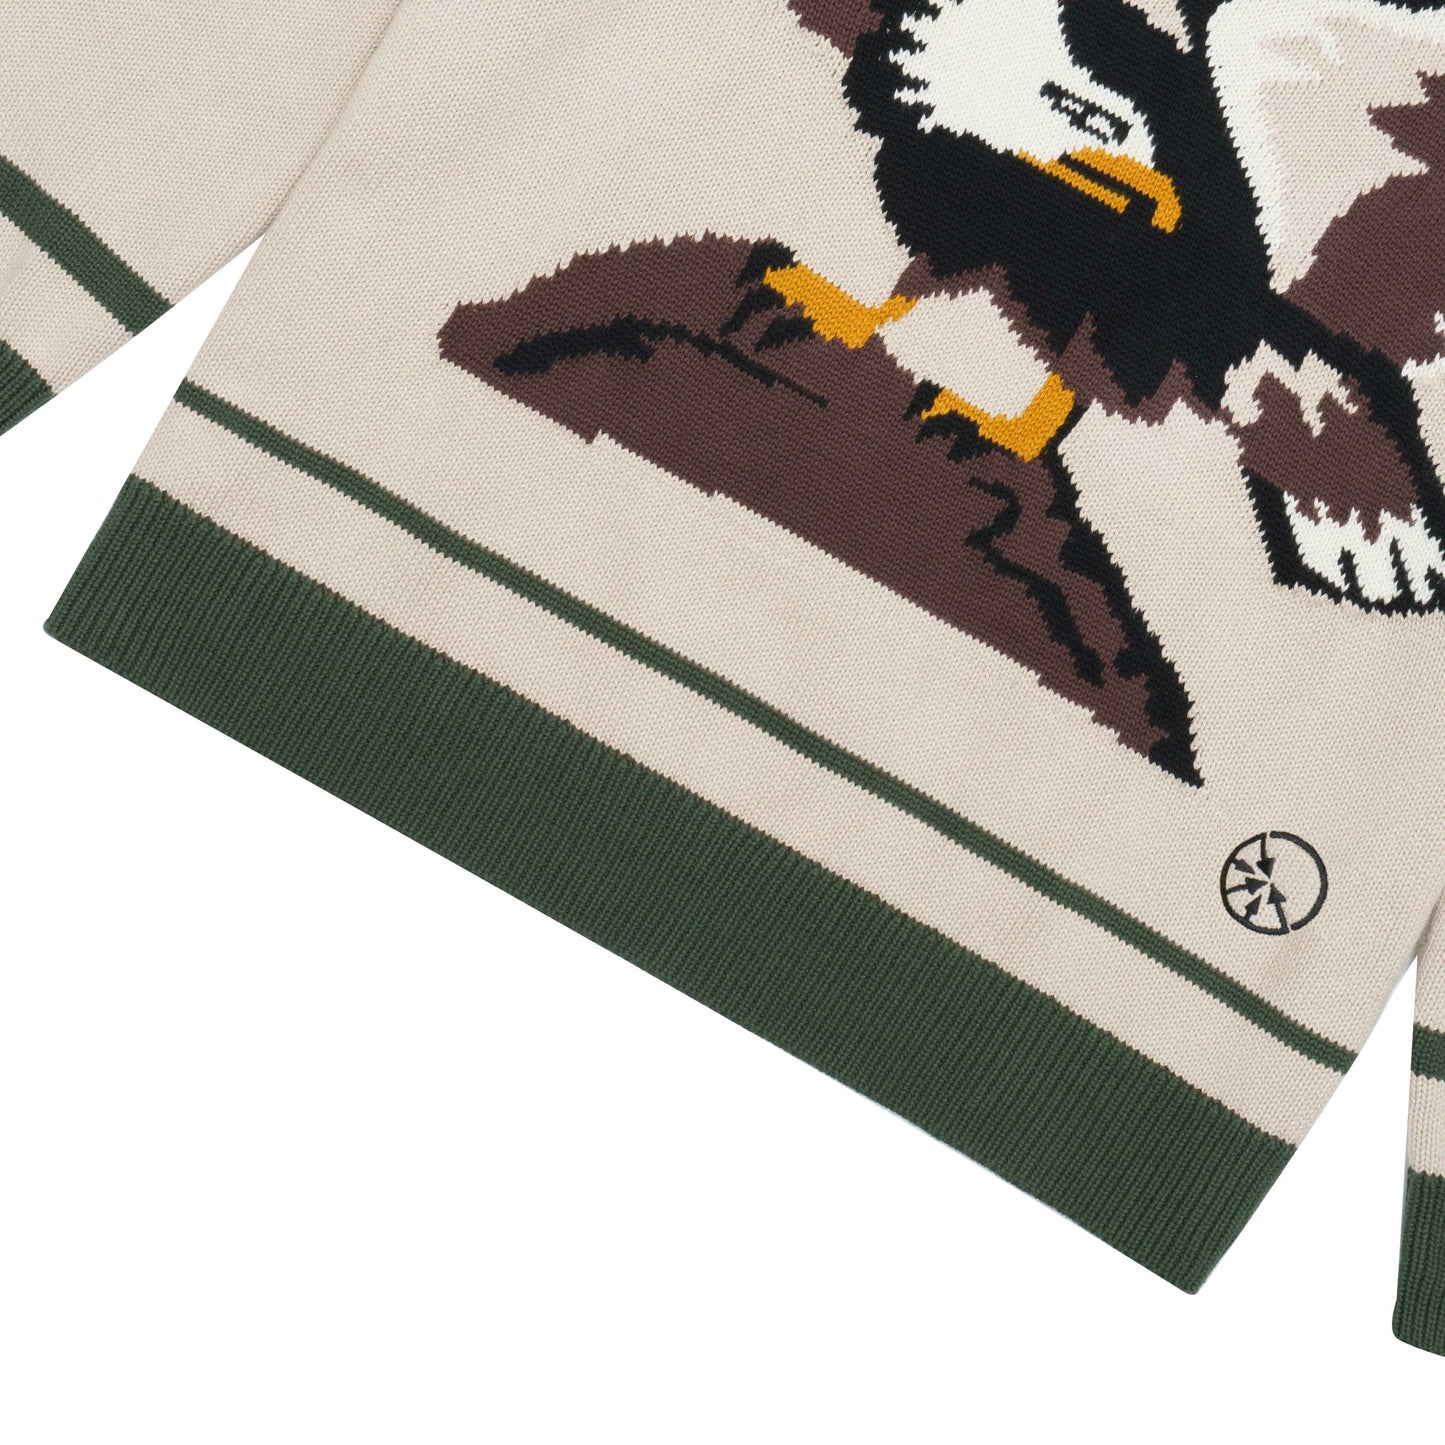 "EAGLE" INTARSIA KNITTED BEIGE SWEATER